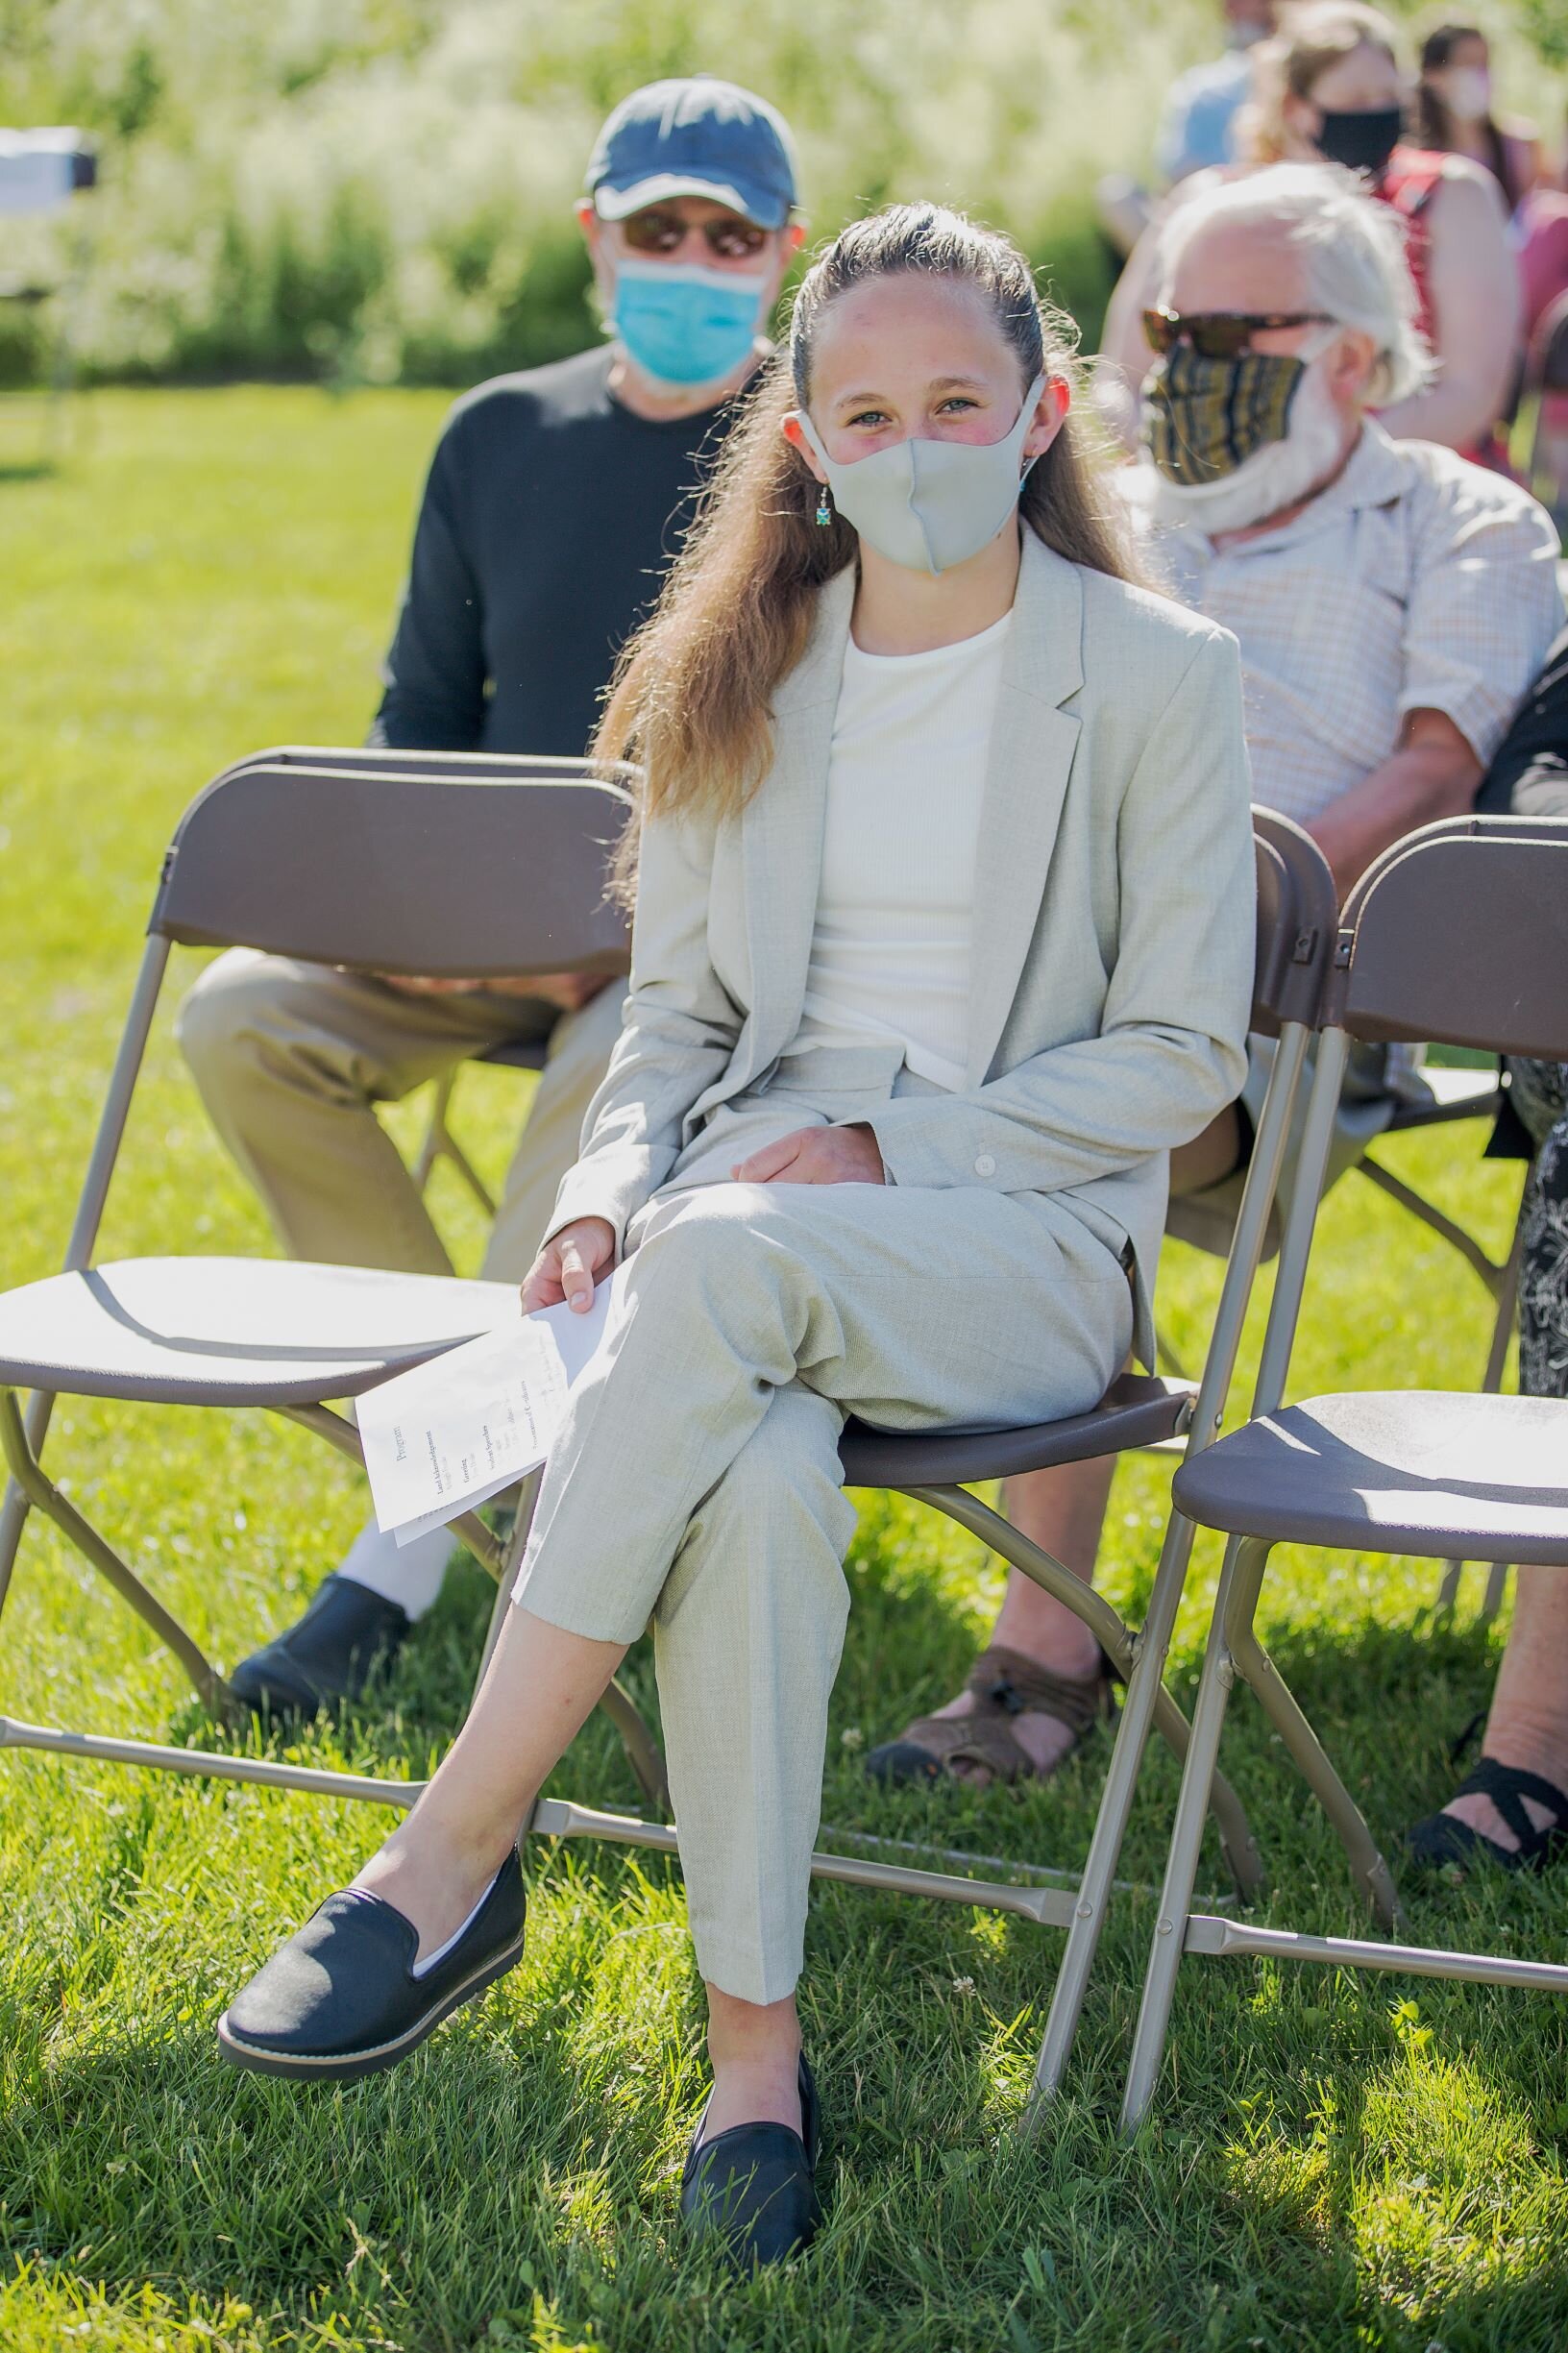   2020-21 taught everyone to recognize a smile behind a mask. Isabelle Fish awaits the ceremony. Photo by Michaela Milligan.  